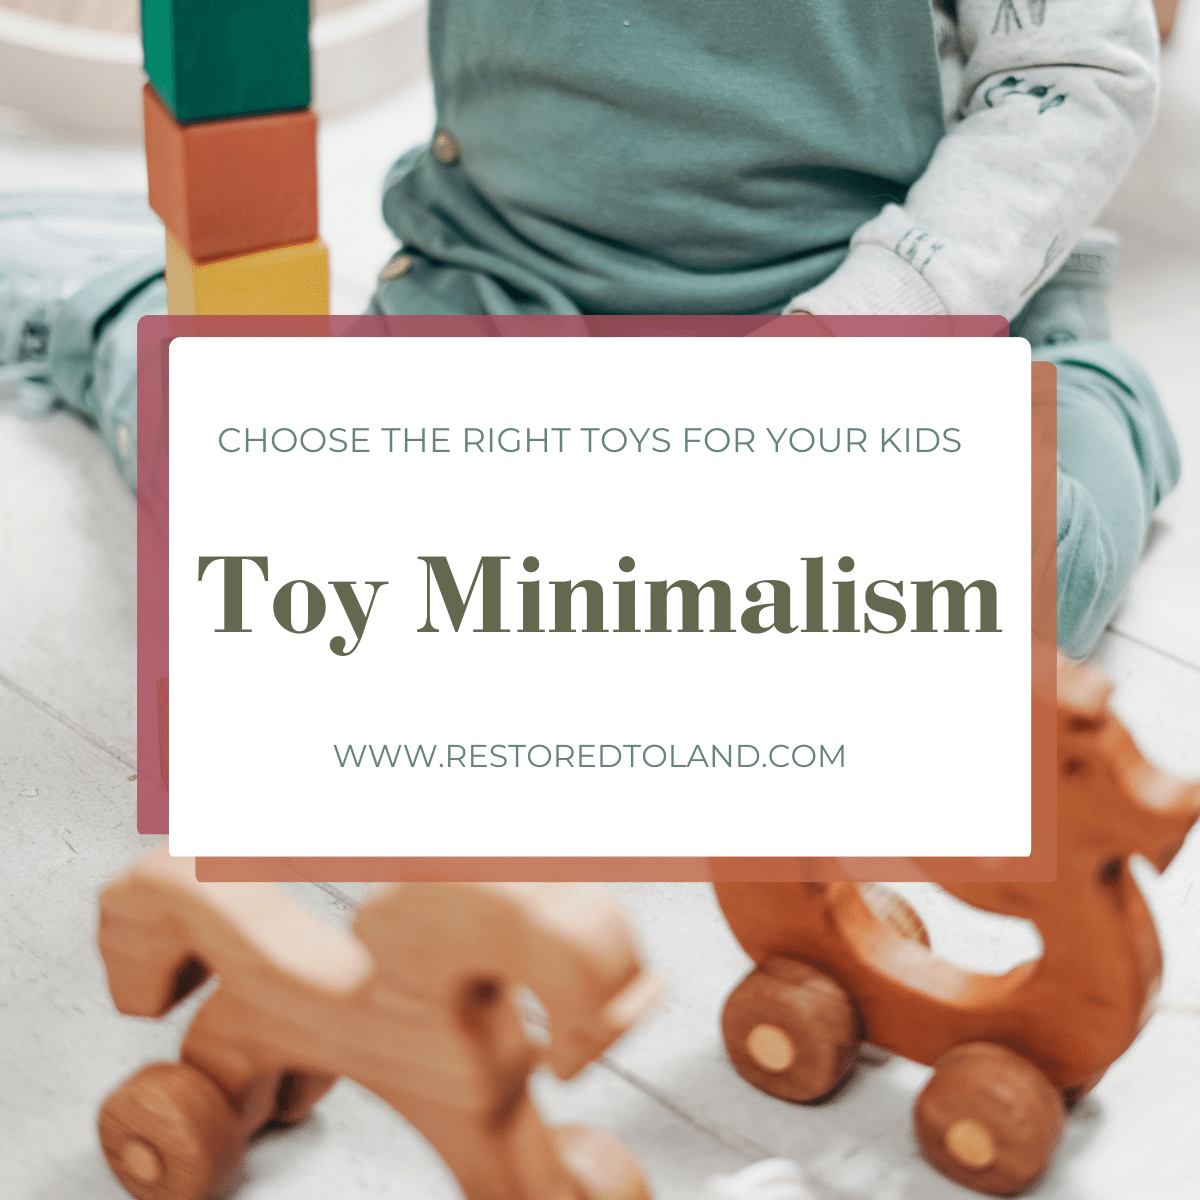 "Toy Minimalism" "choose the right toys for your family" Overlaid on a toddler with wooden toys